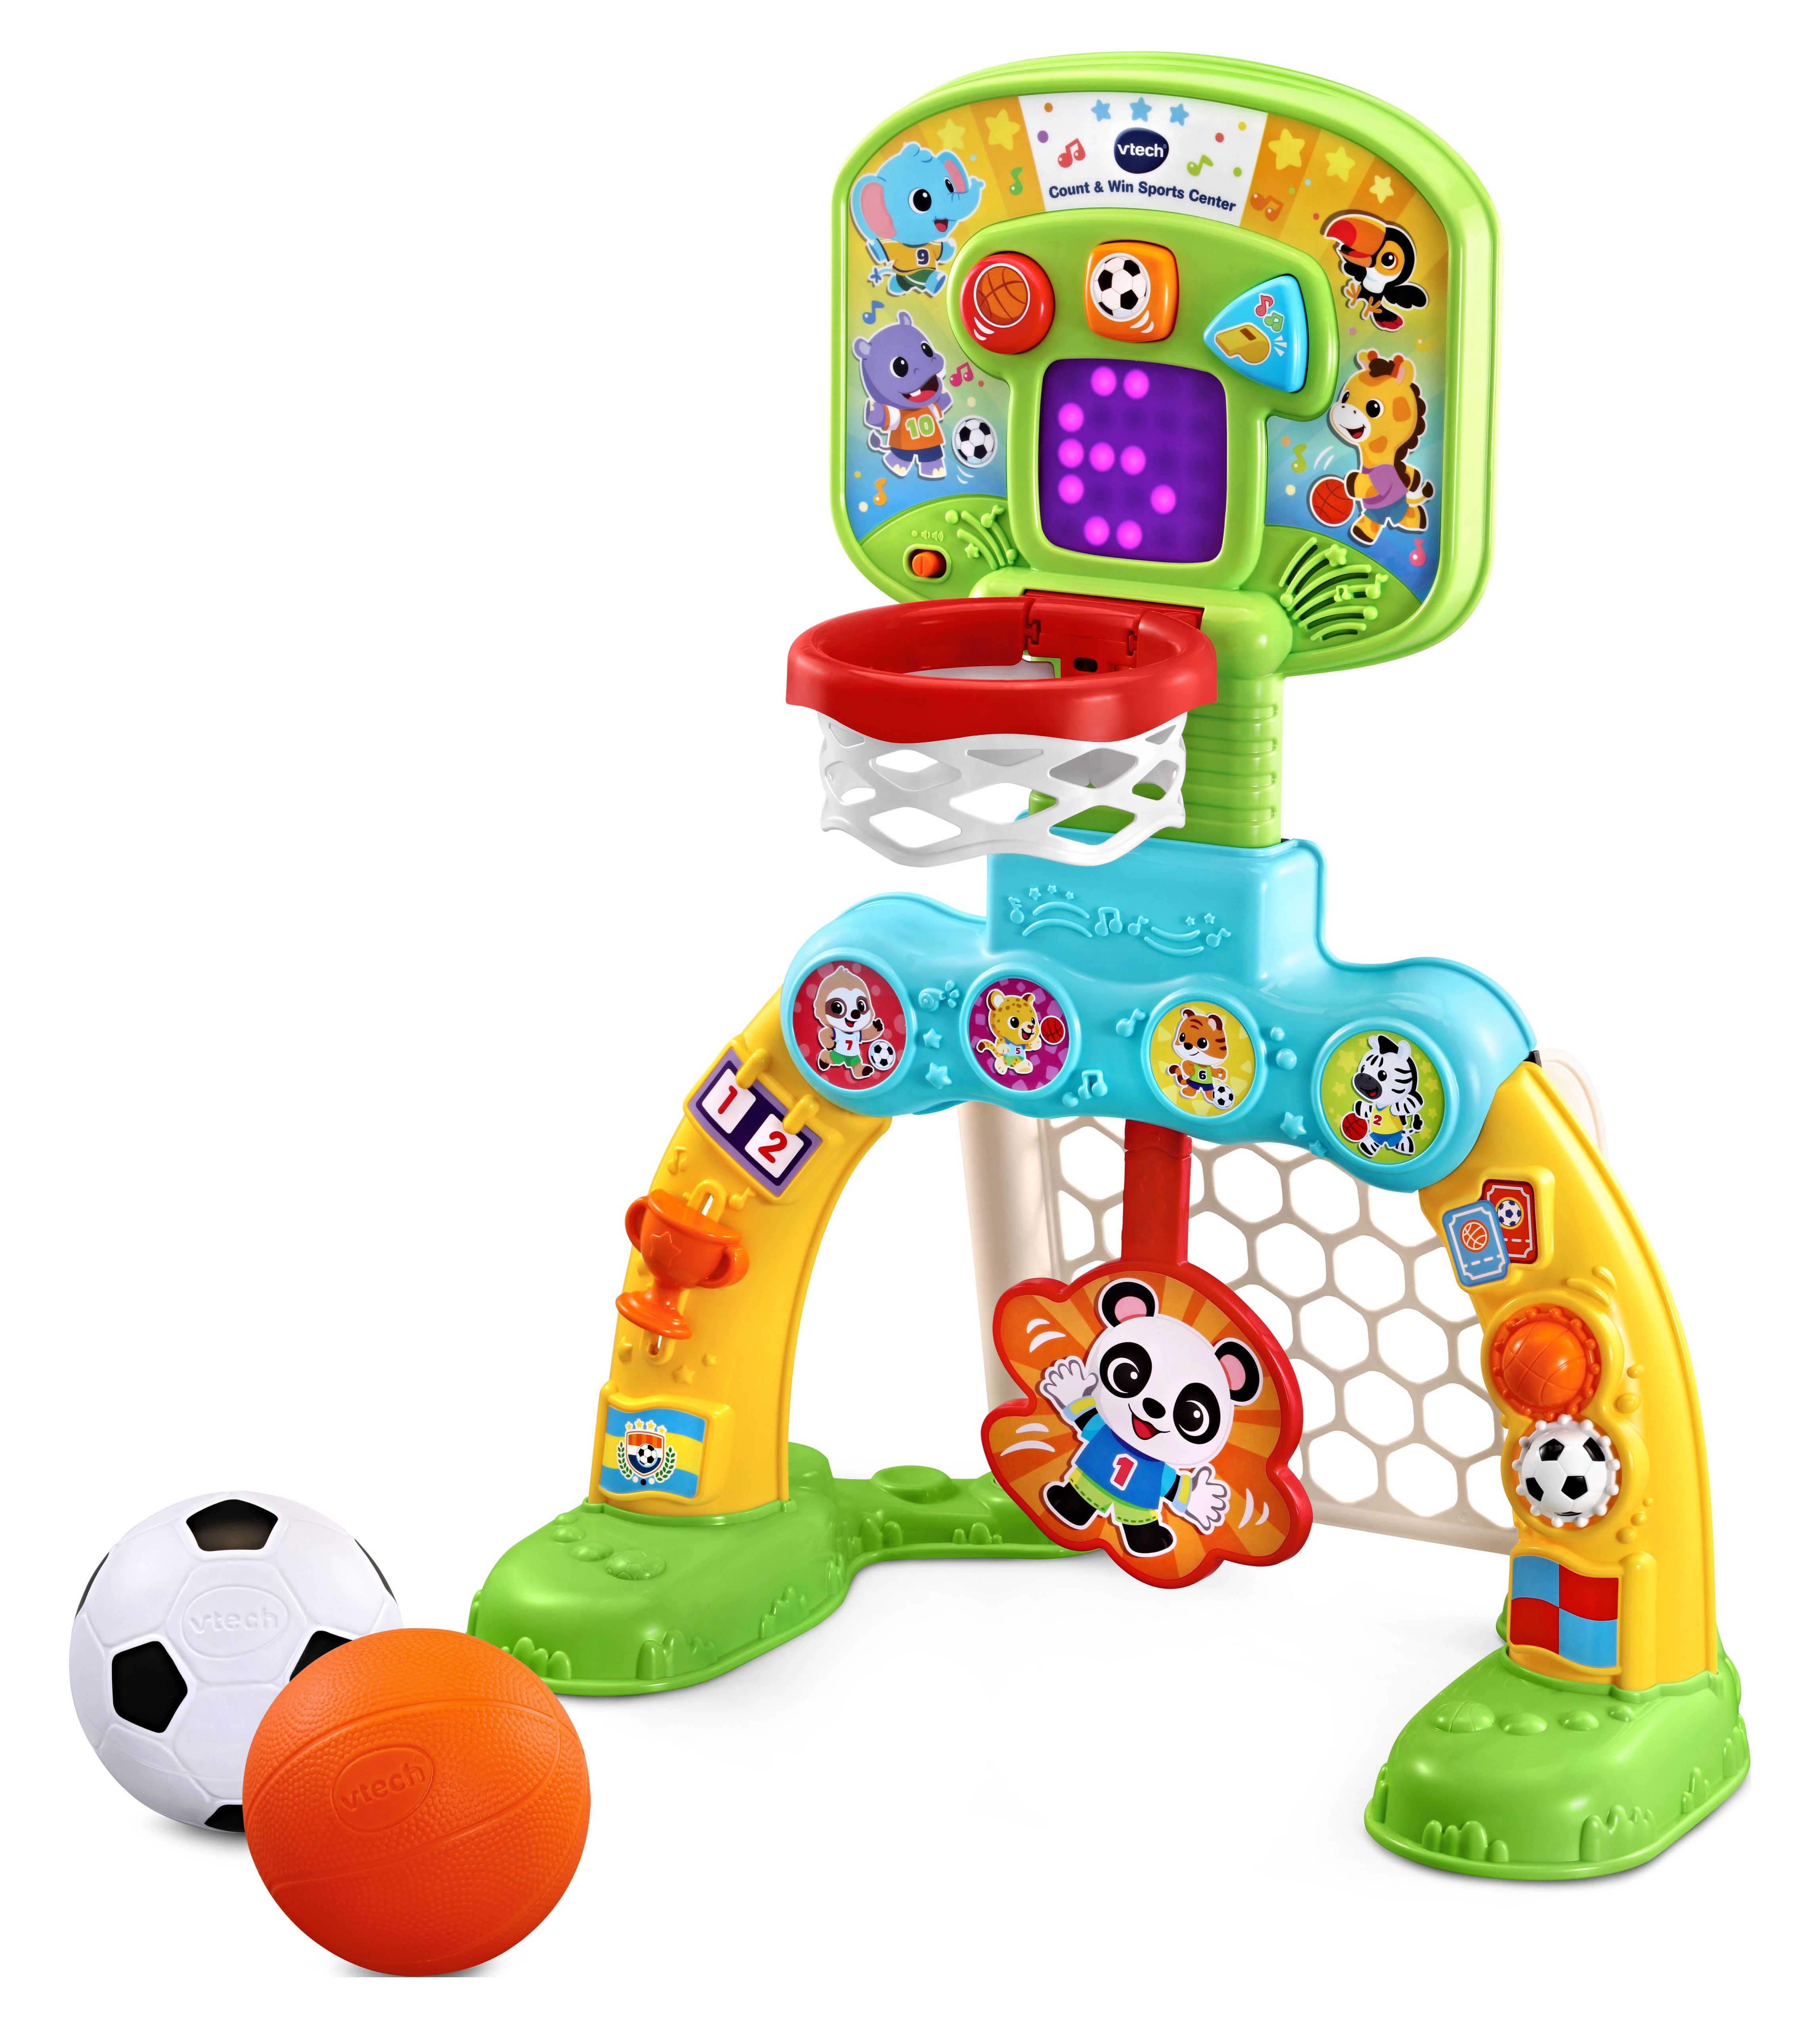 VTech Count & Win Sports Center, Basketball and Soccer Toy for Toddlers, Teaches Physical Activity - image 10 of 13